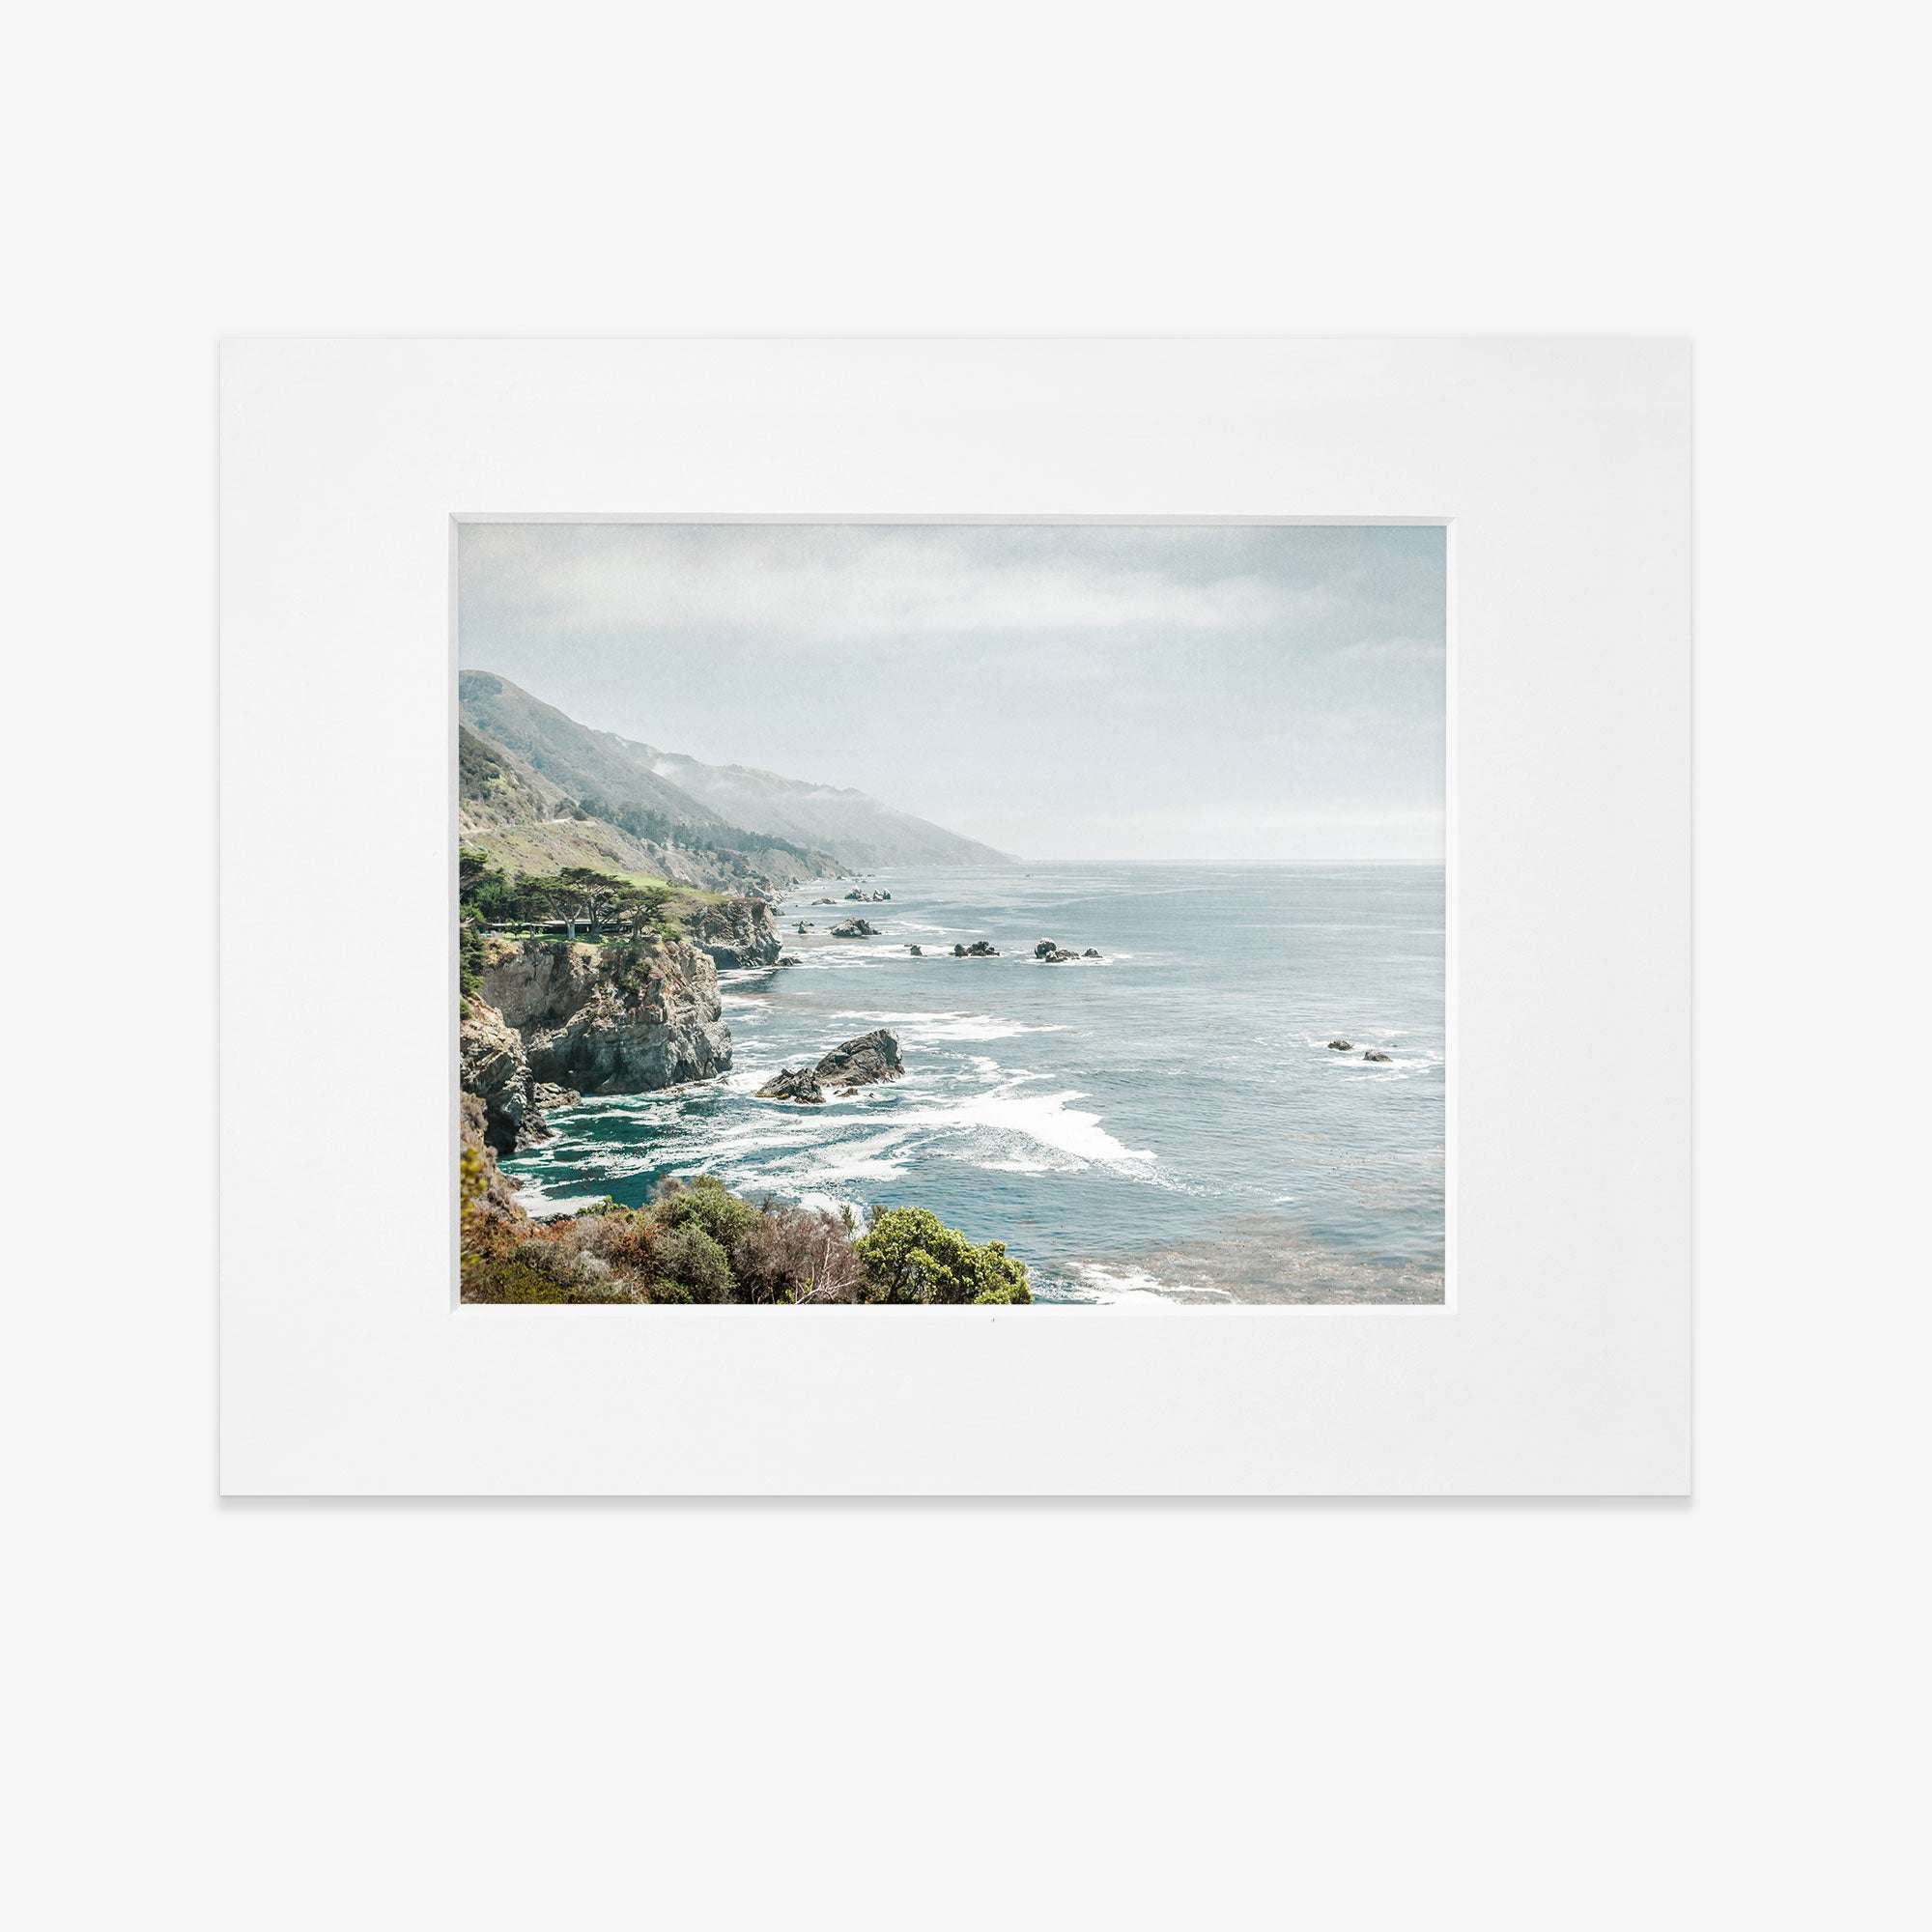 A matted print depicting a scenic coastal landscape along Big Sur with rocky cliffs and the ocean, viewed from a high vantage point under a hazy sky -  Offley Green&#39;s Big Sur Landscape Print, &#39;Rocky Rocks&#39;.